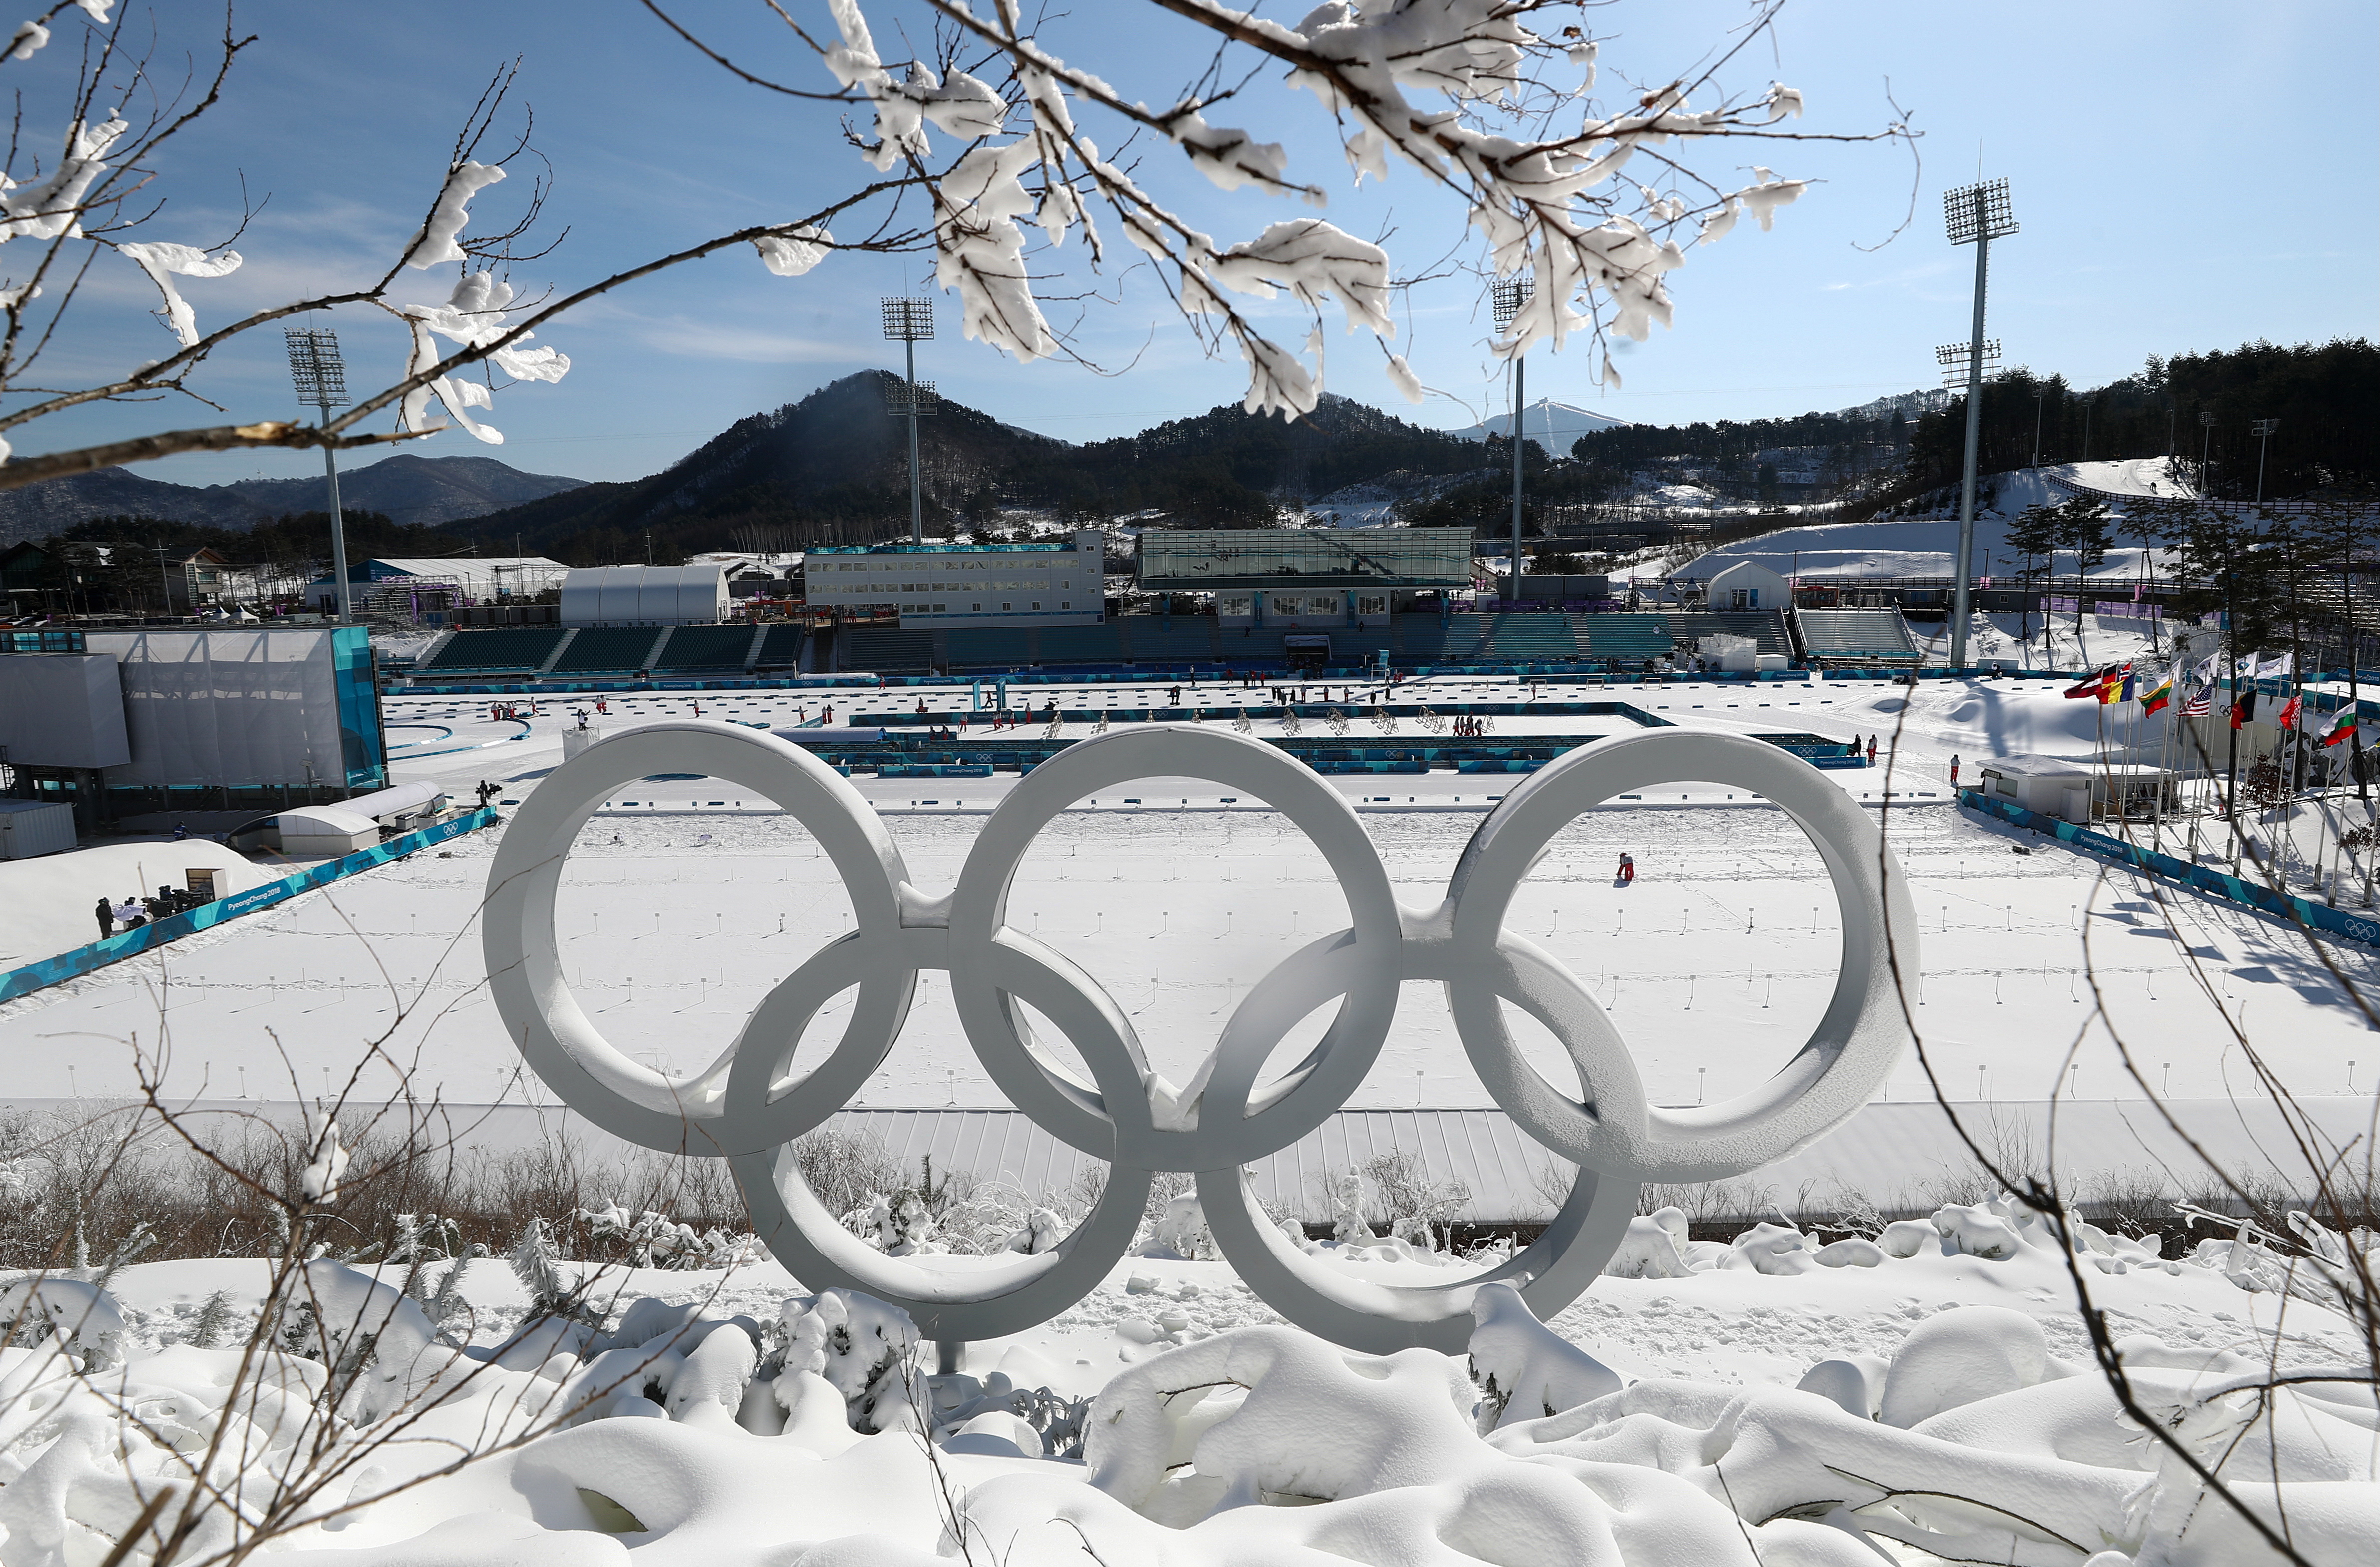 PyeongChang two days ahead of opening of 2018 Winter Olympic Games